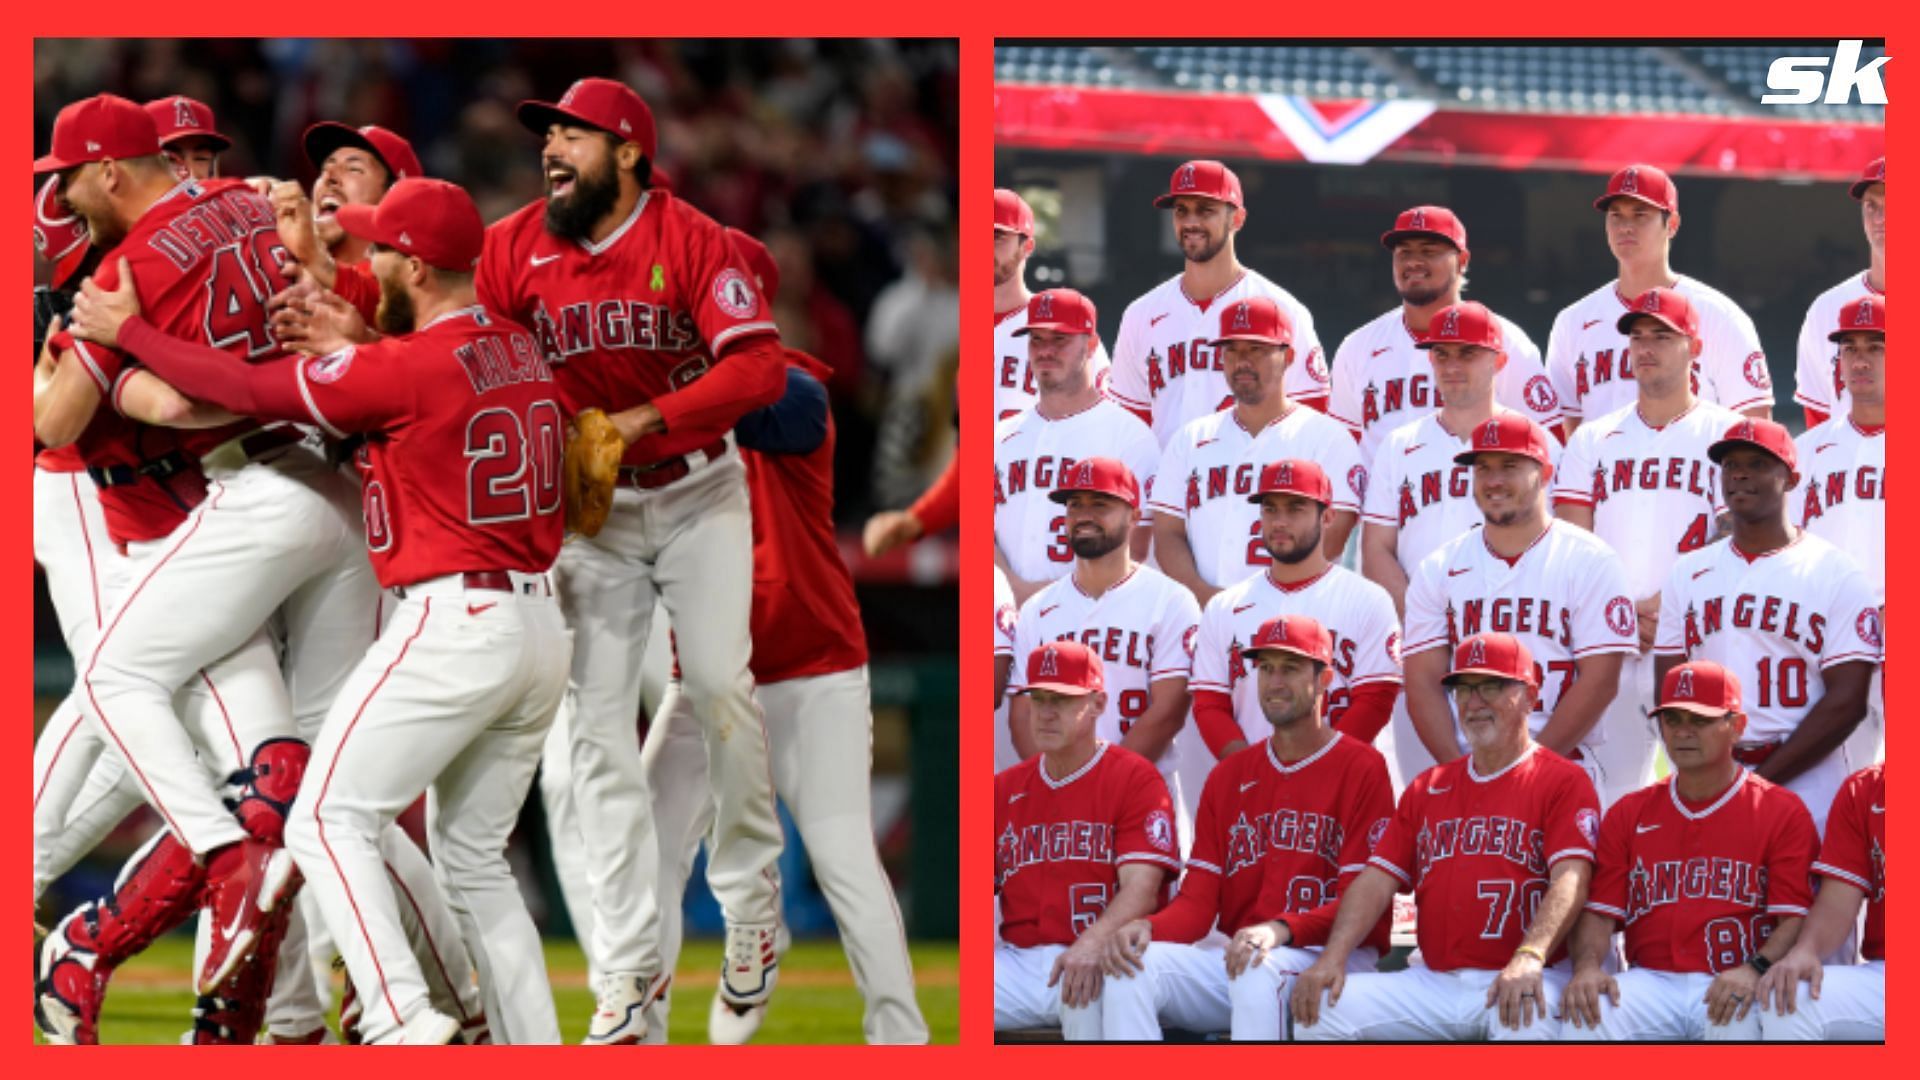 Los Angeles Angels Team in the frame